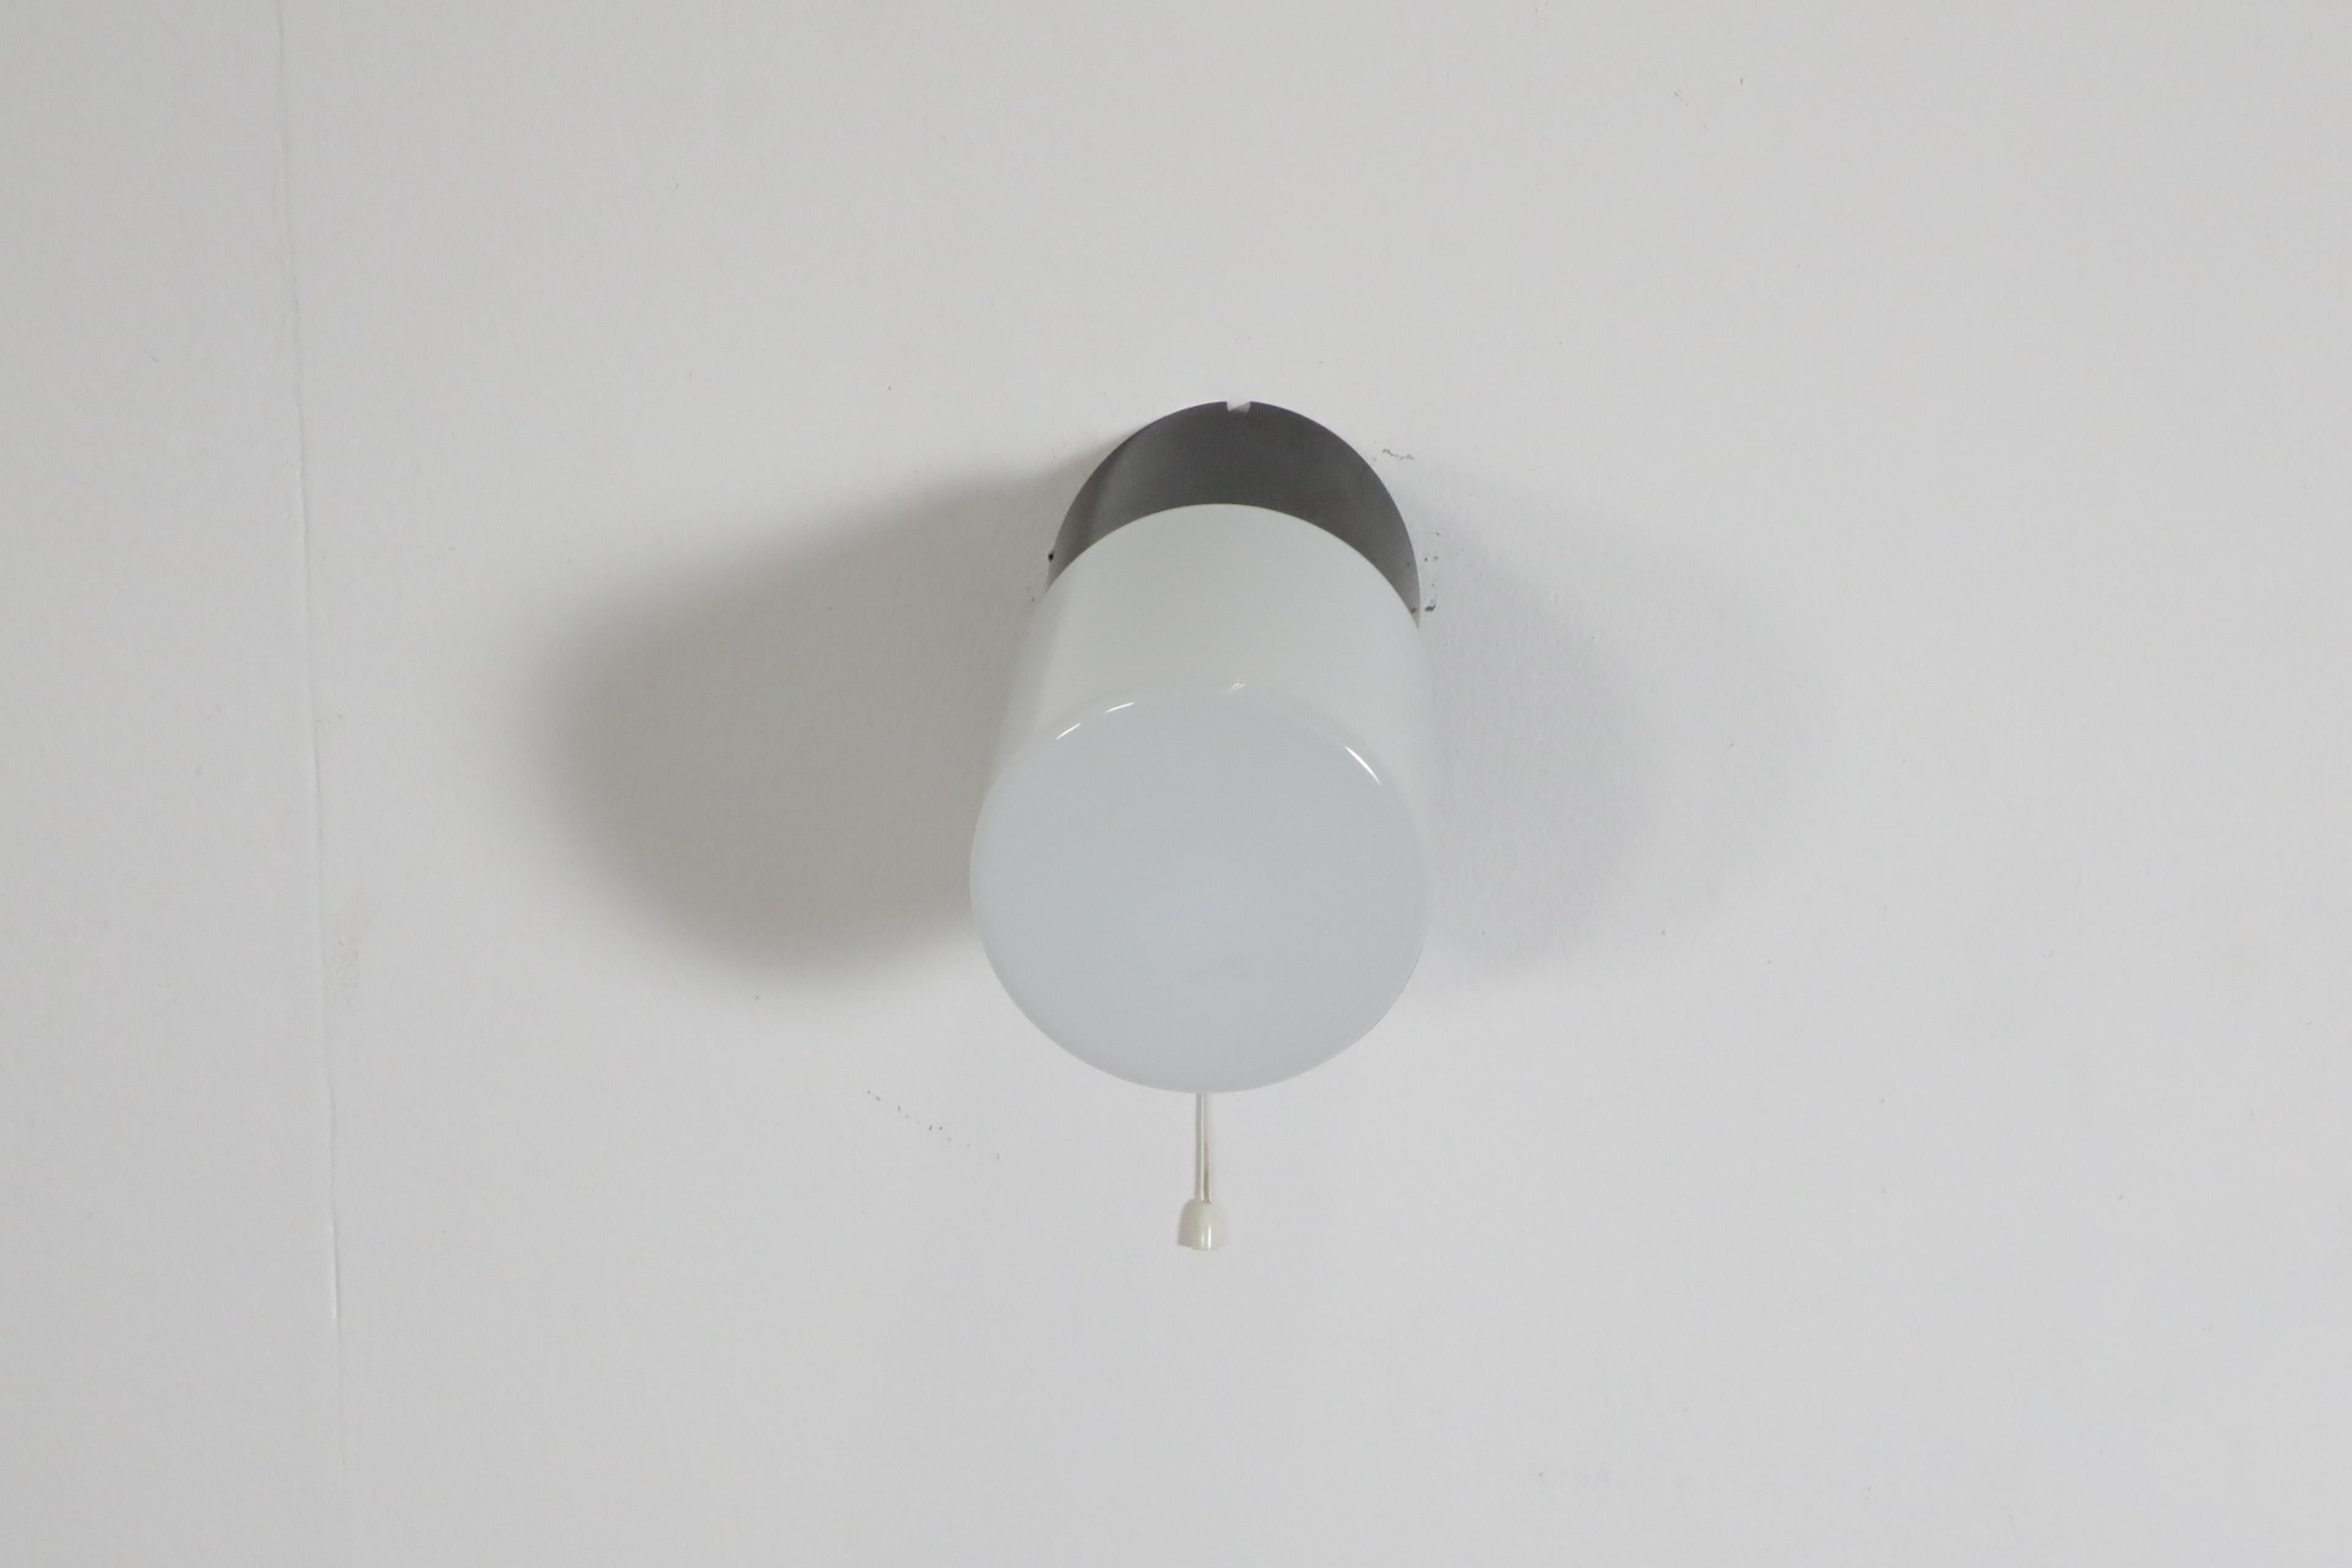 Cylinder Milk Glass Sconce with Black Bakelite Base and Pull String Switch For Sale 1